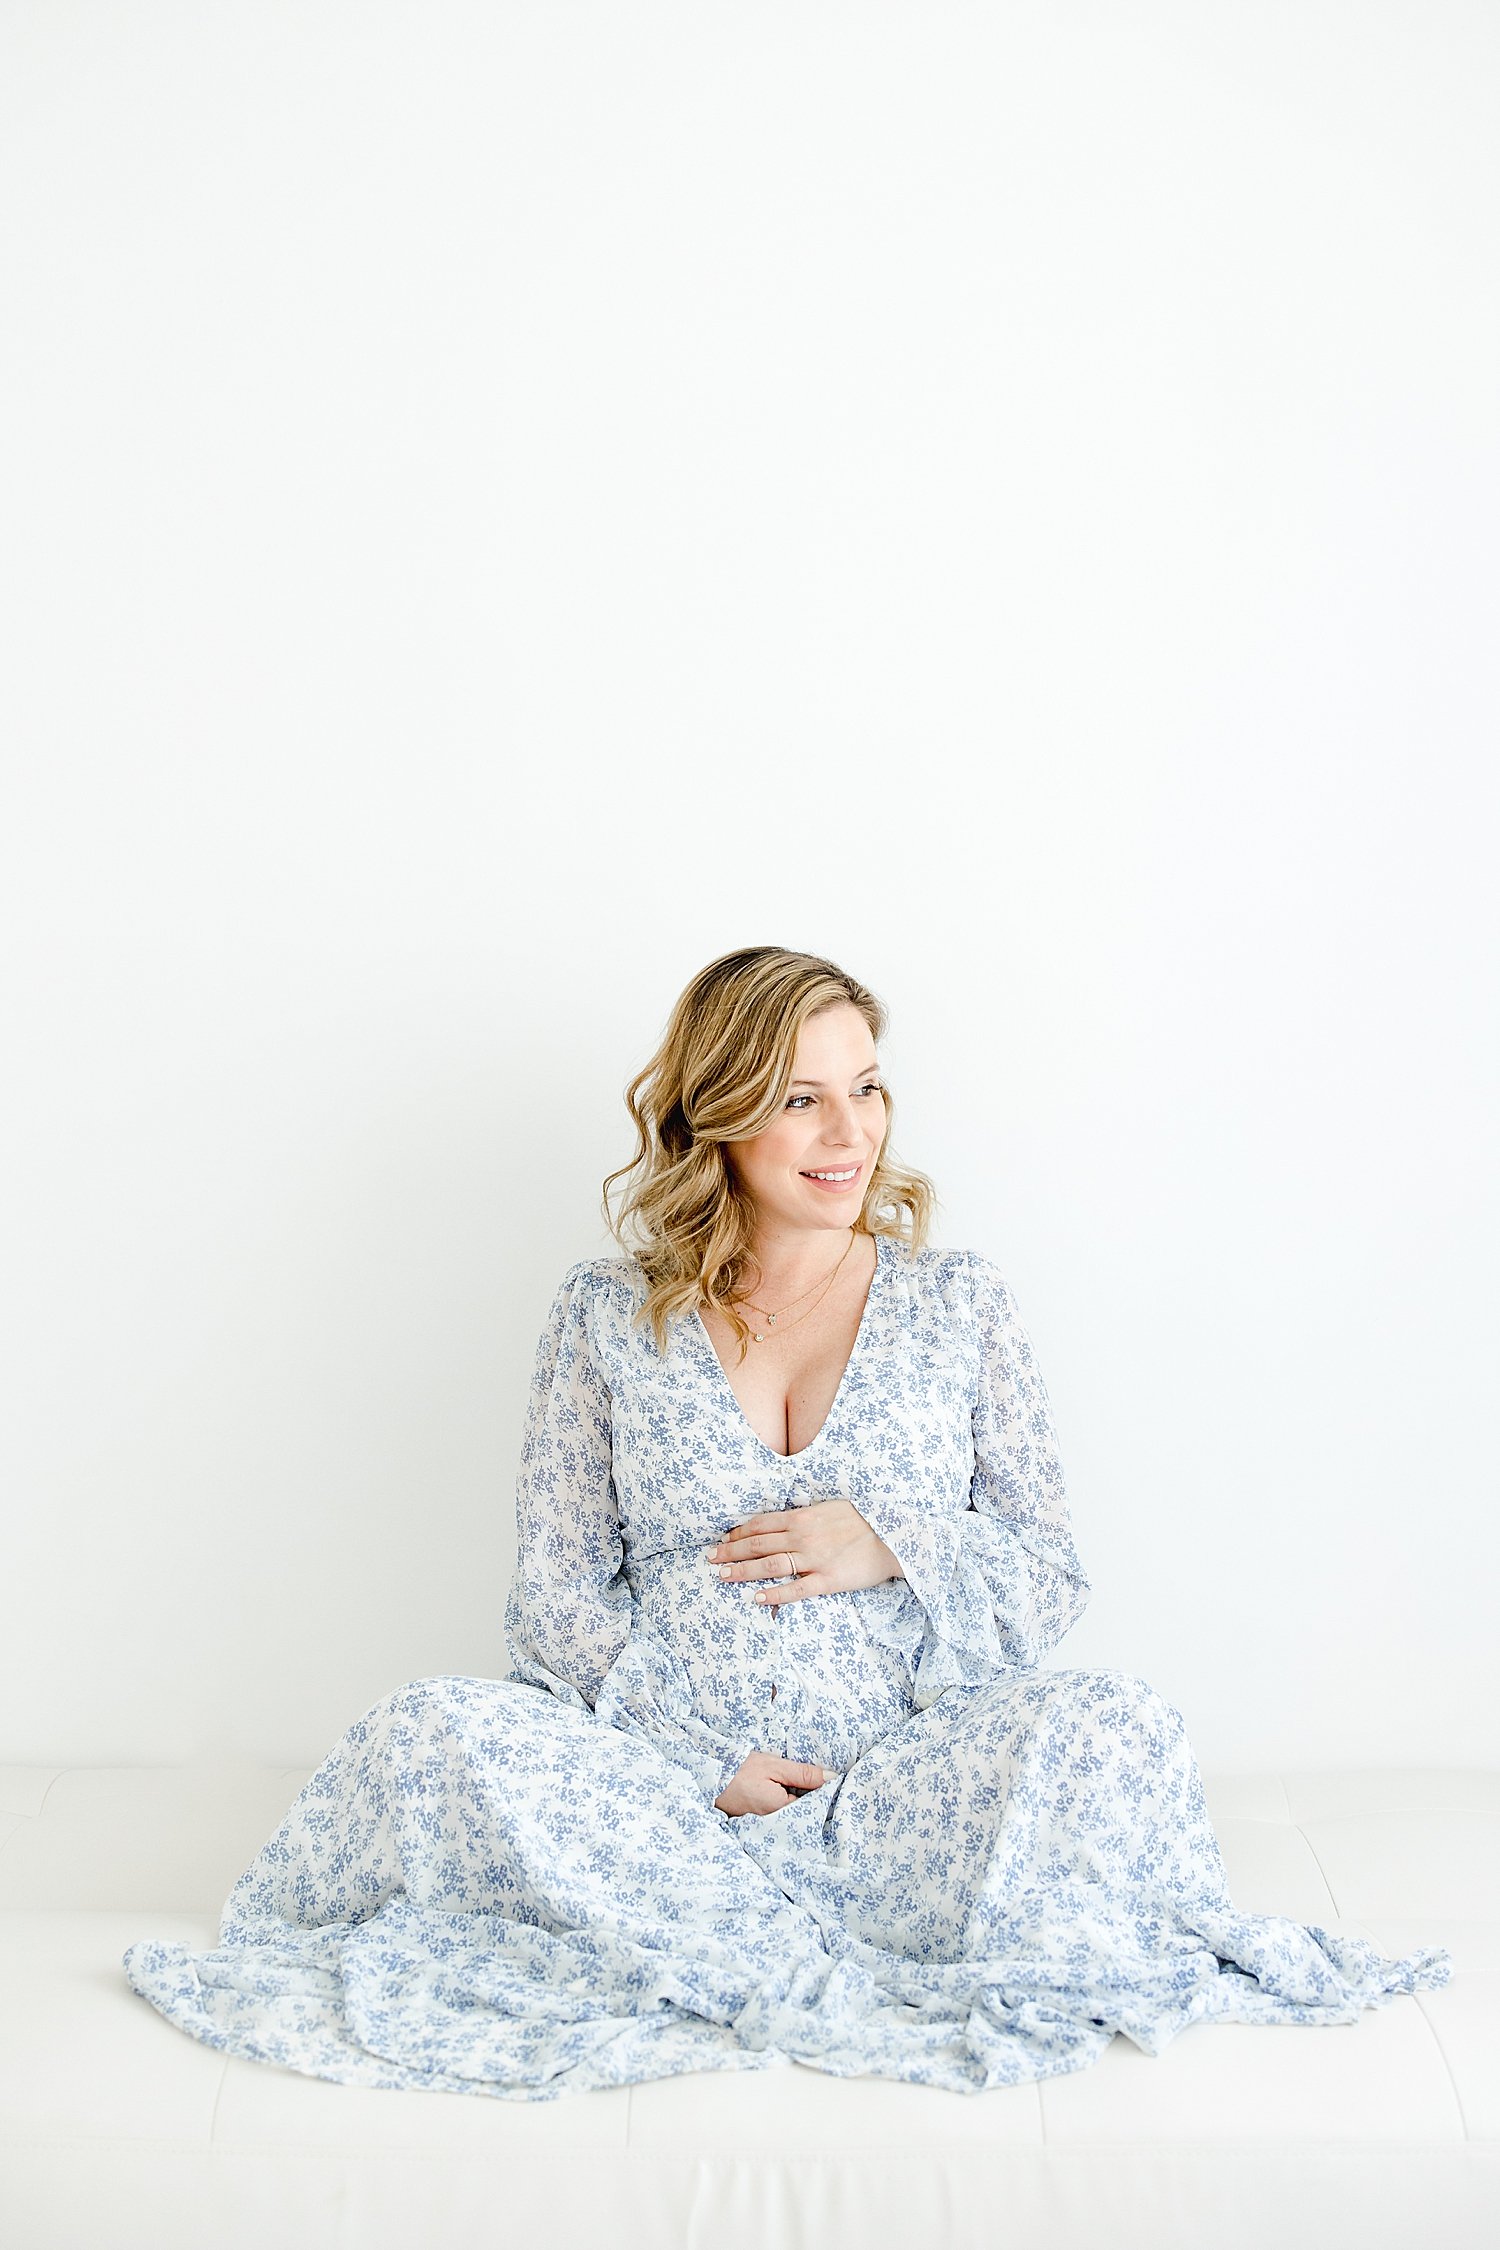 Maternity photoshoot for expecting Mom in Westport studio | Kristin Wood Photography